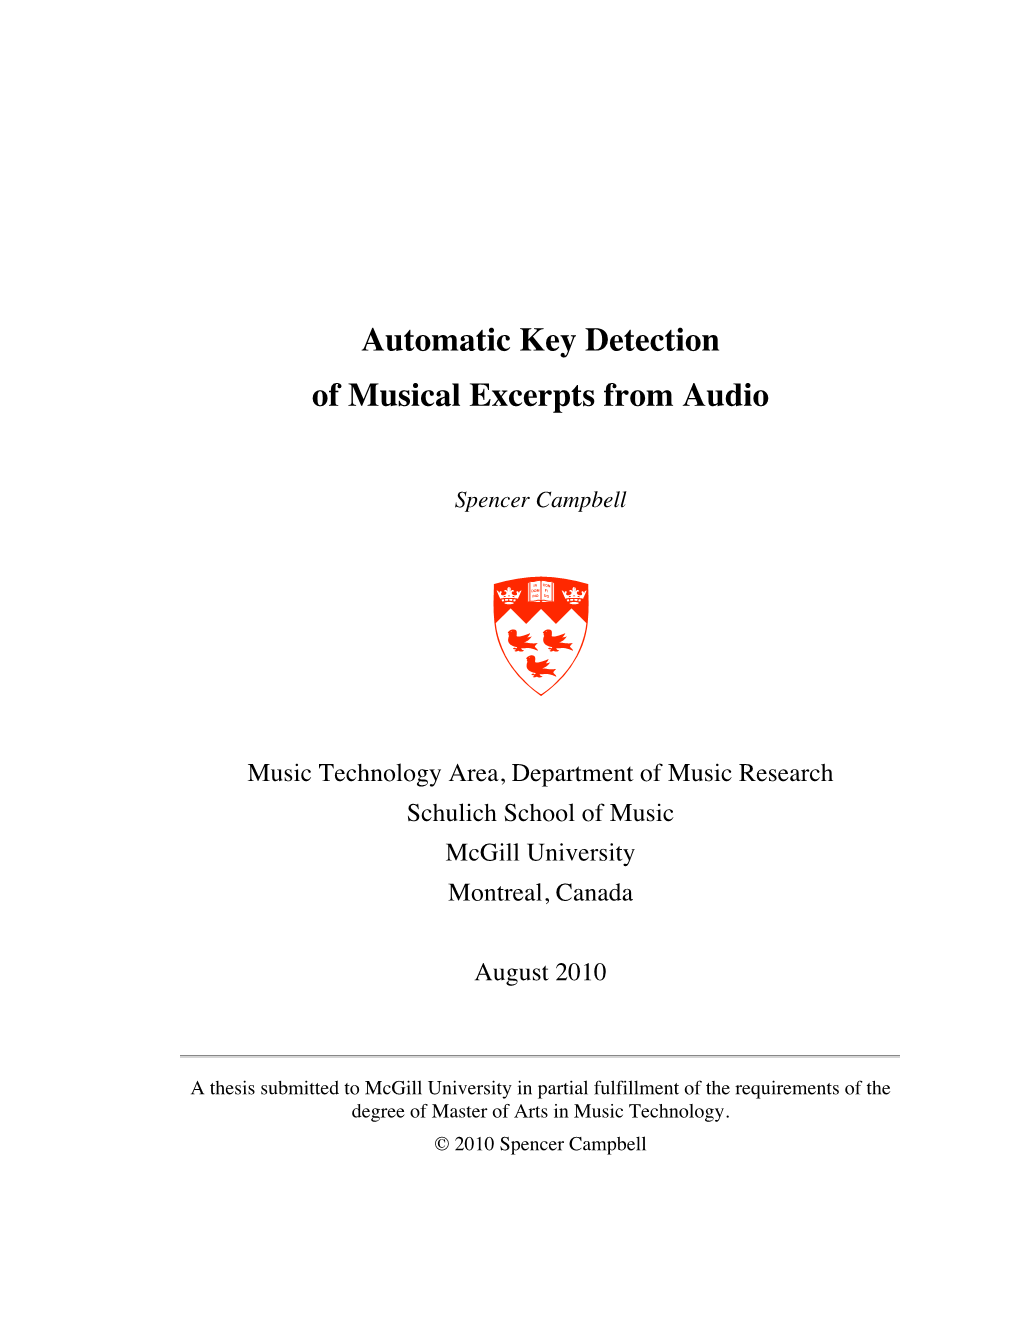 Automatic Key Detection of Musical Excerpts from Audio